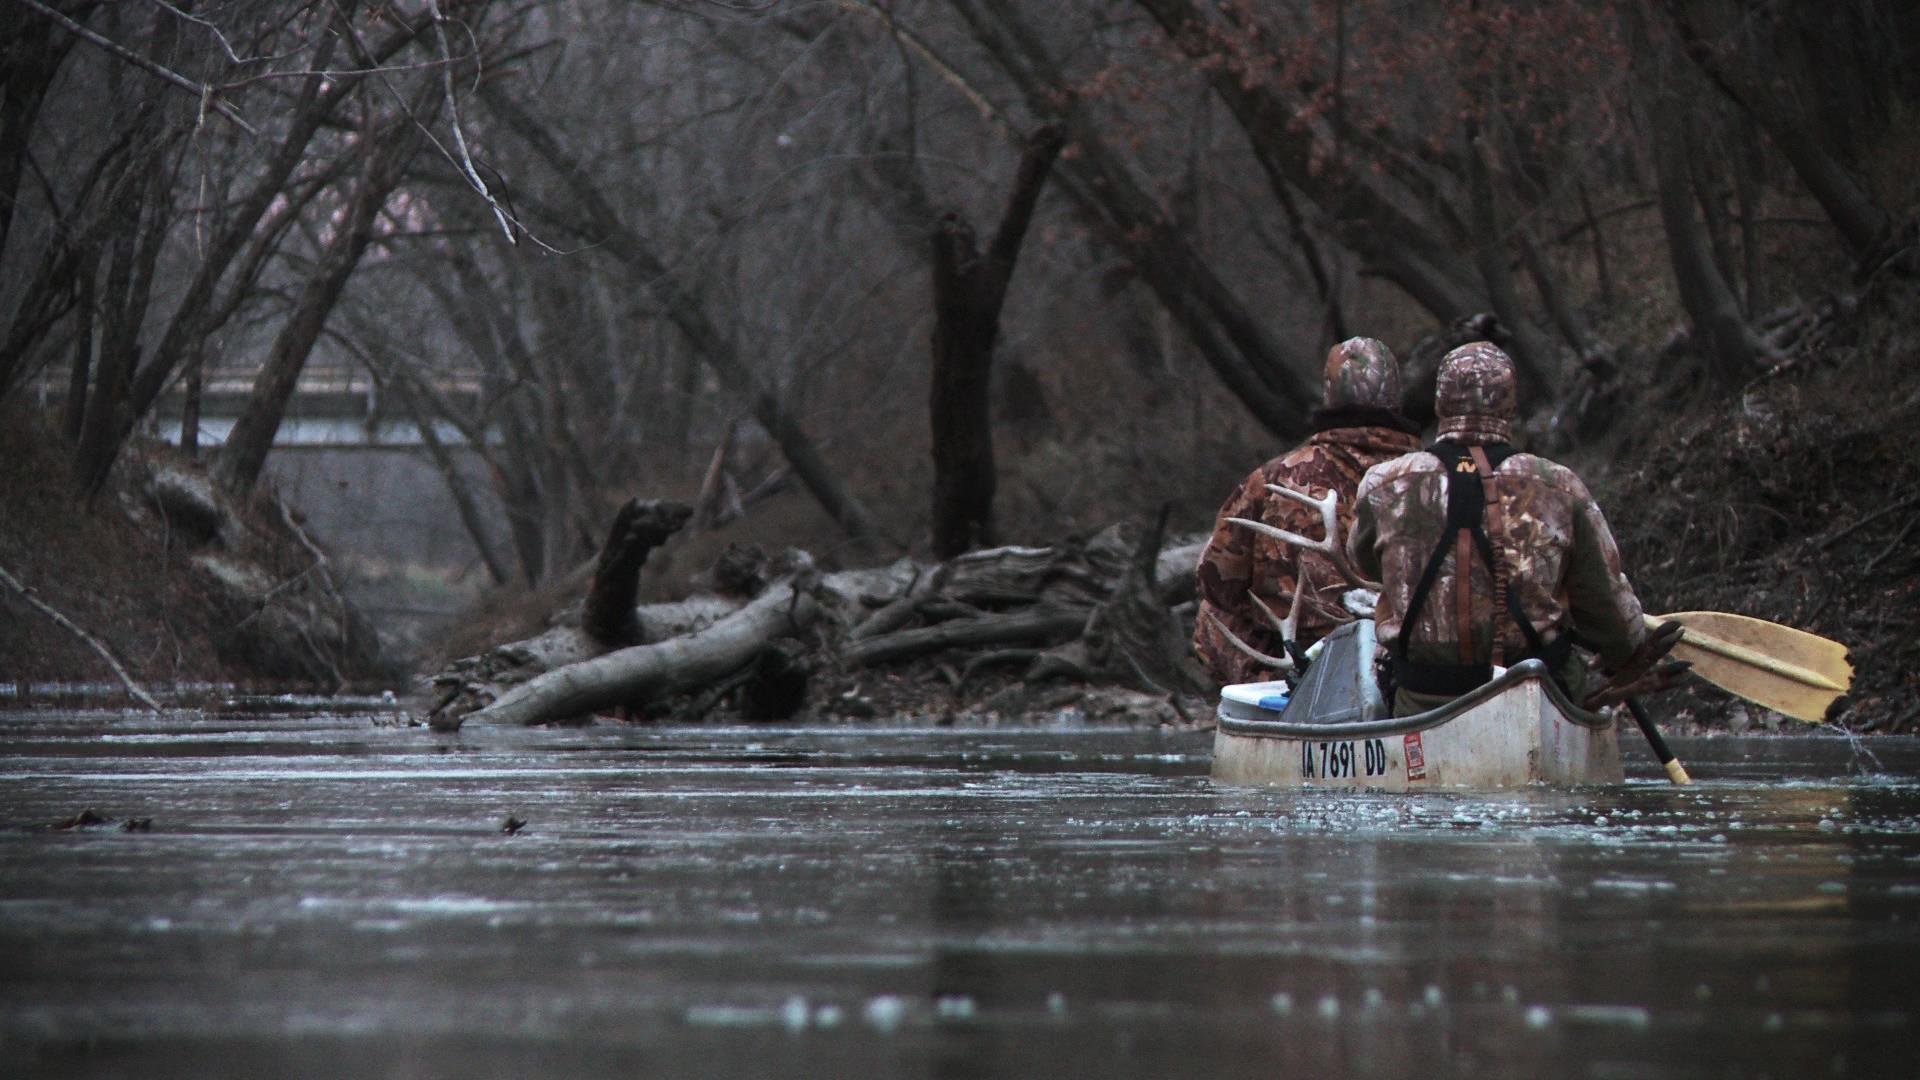 hunters use a canoe to access unpressured public hunting land